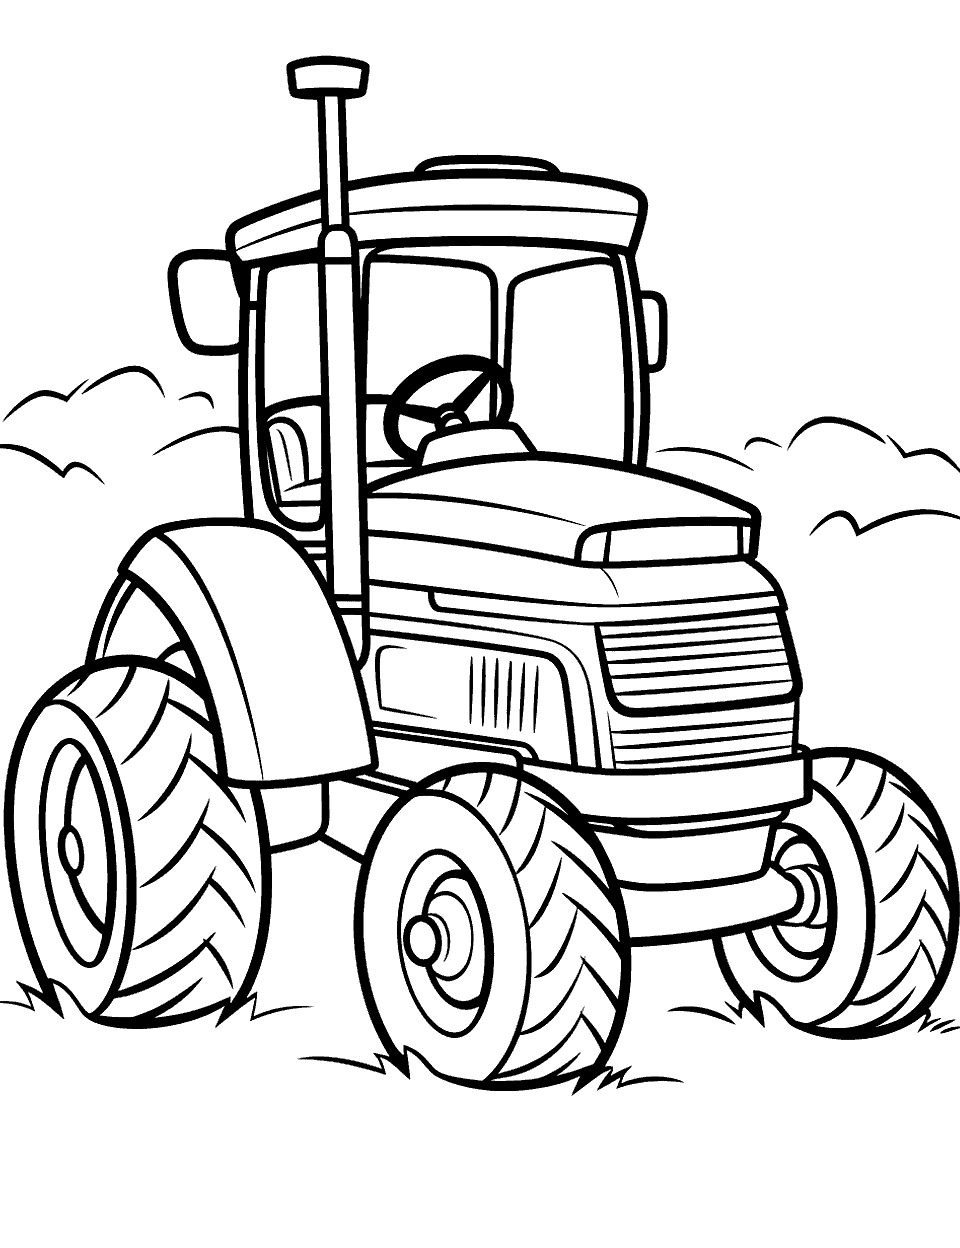 Cute Cartoon Tractor Coloring Page - A whimsically styled, cute cartoon tractor with exaggerated features.